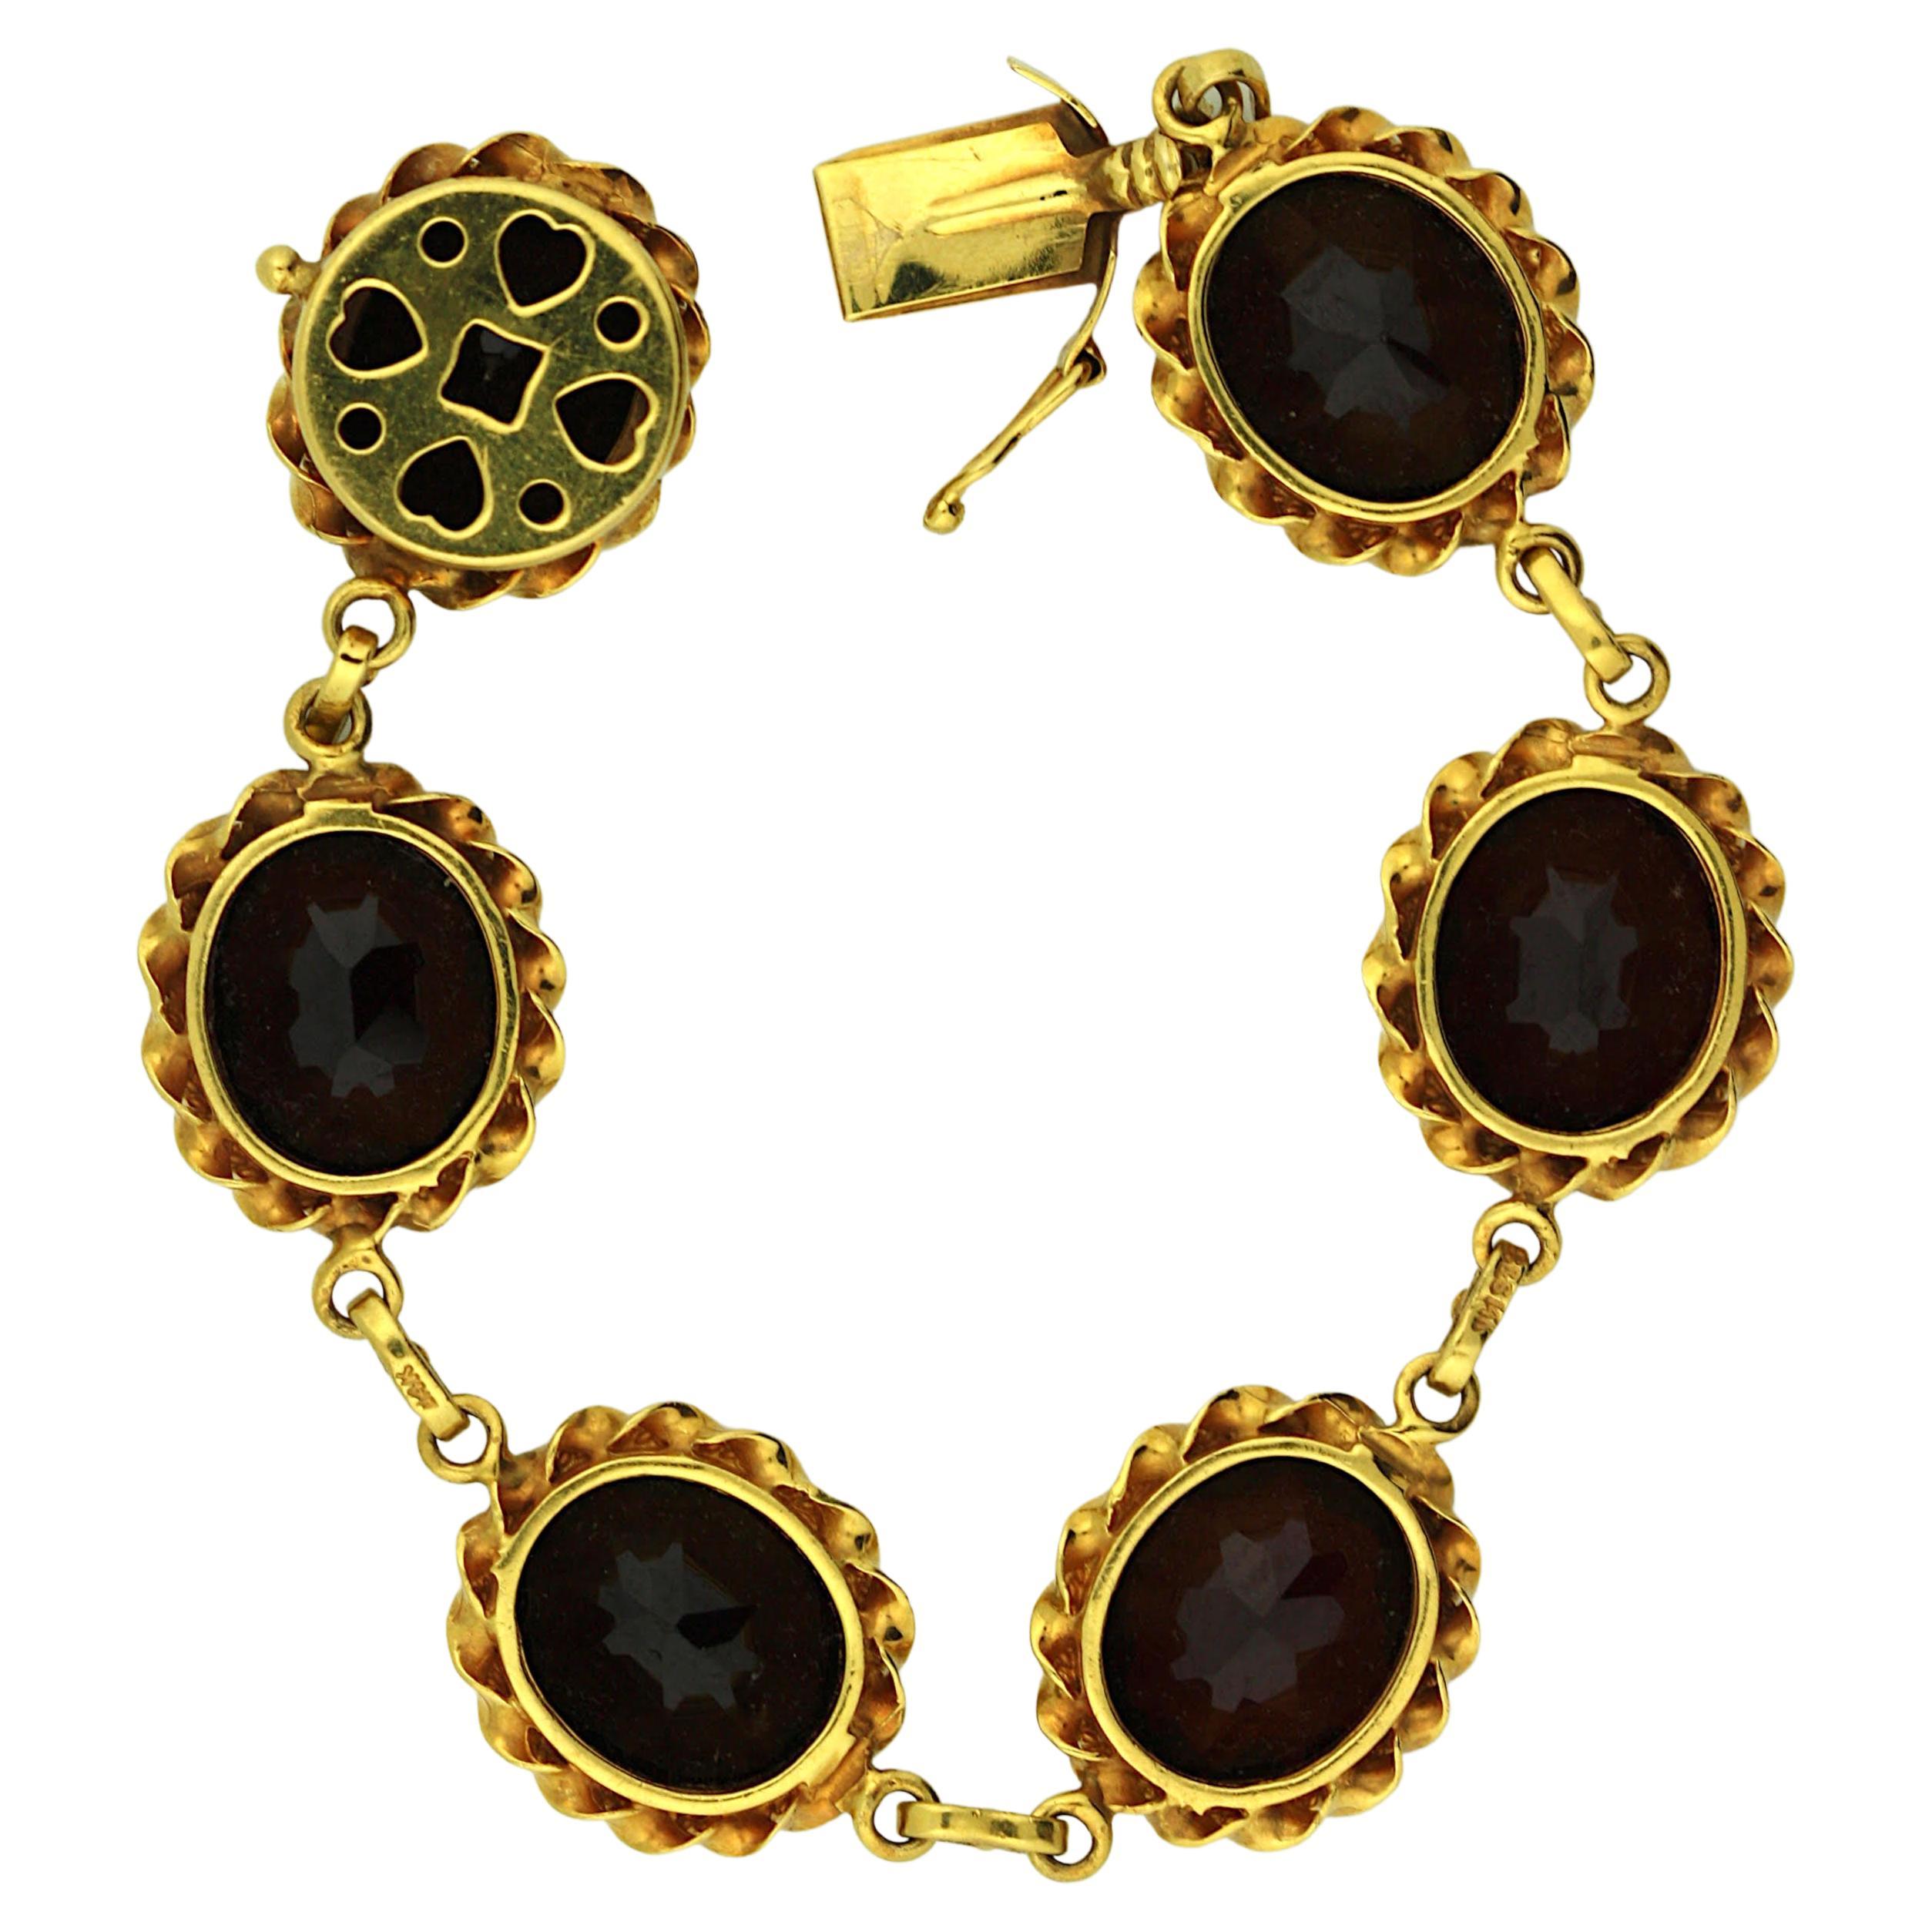 Estate nice and heavy 14K yellow gold bracelet, designed with 7 large natural oval cut garnet stone about 12mm x10mm. marked 14KG. weight about 31 grams. We also offer clip on earring matching the bracelet.